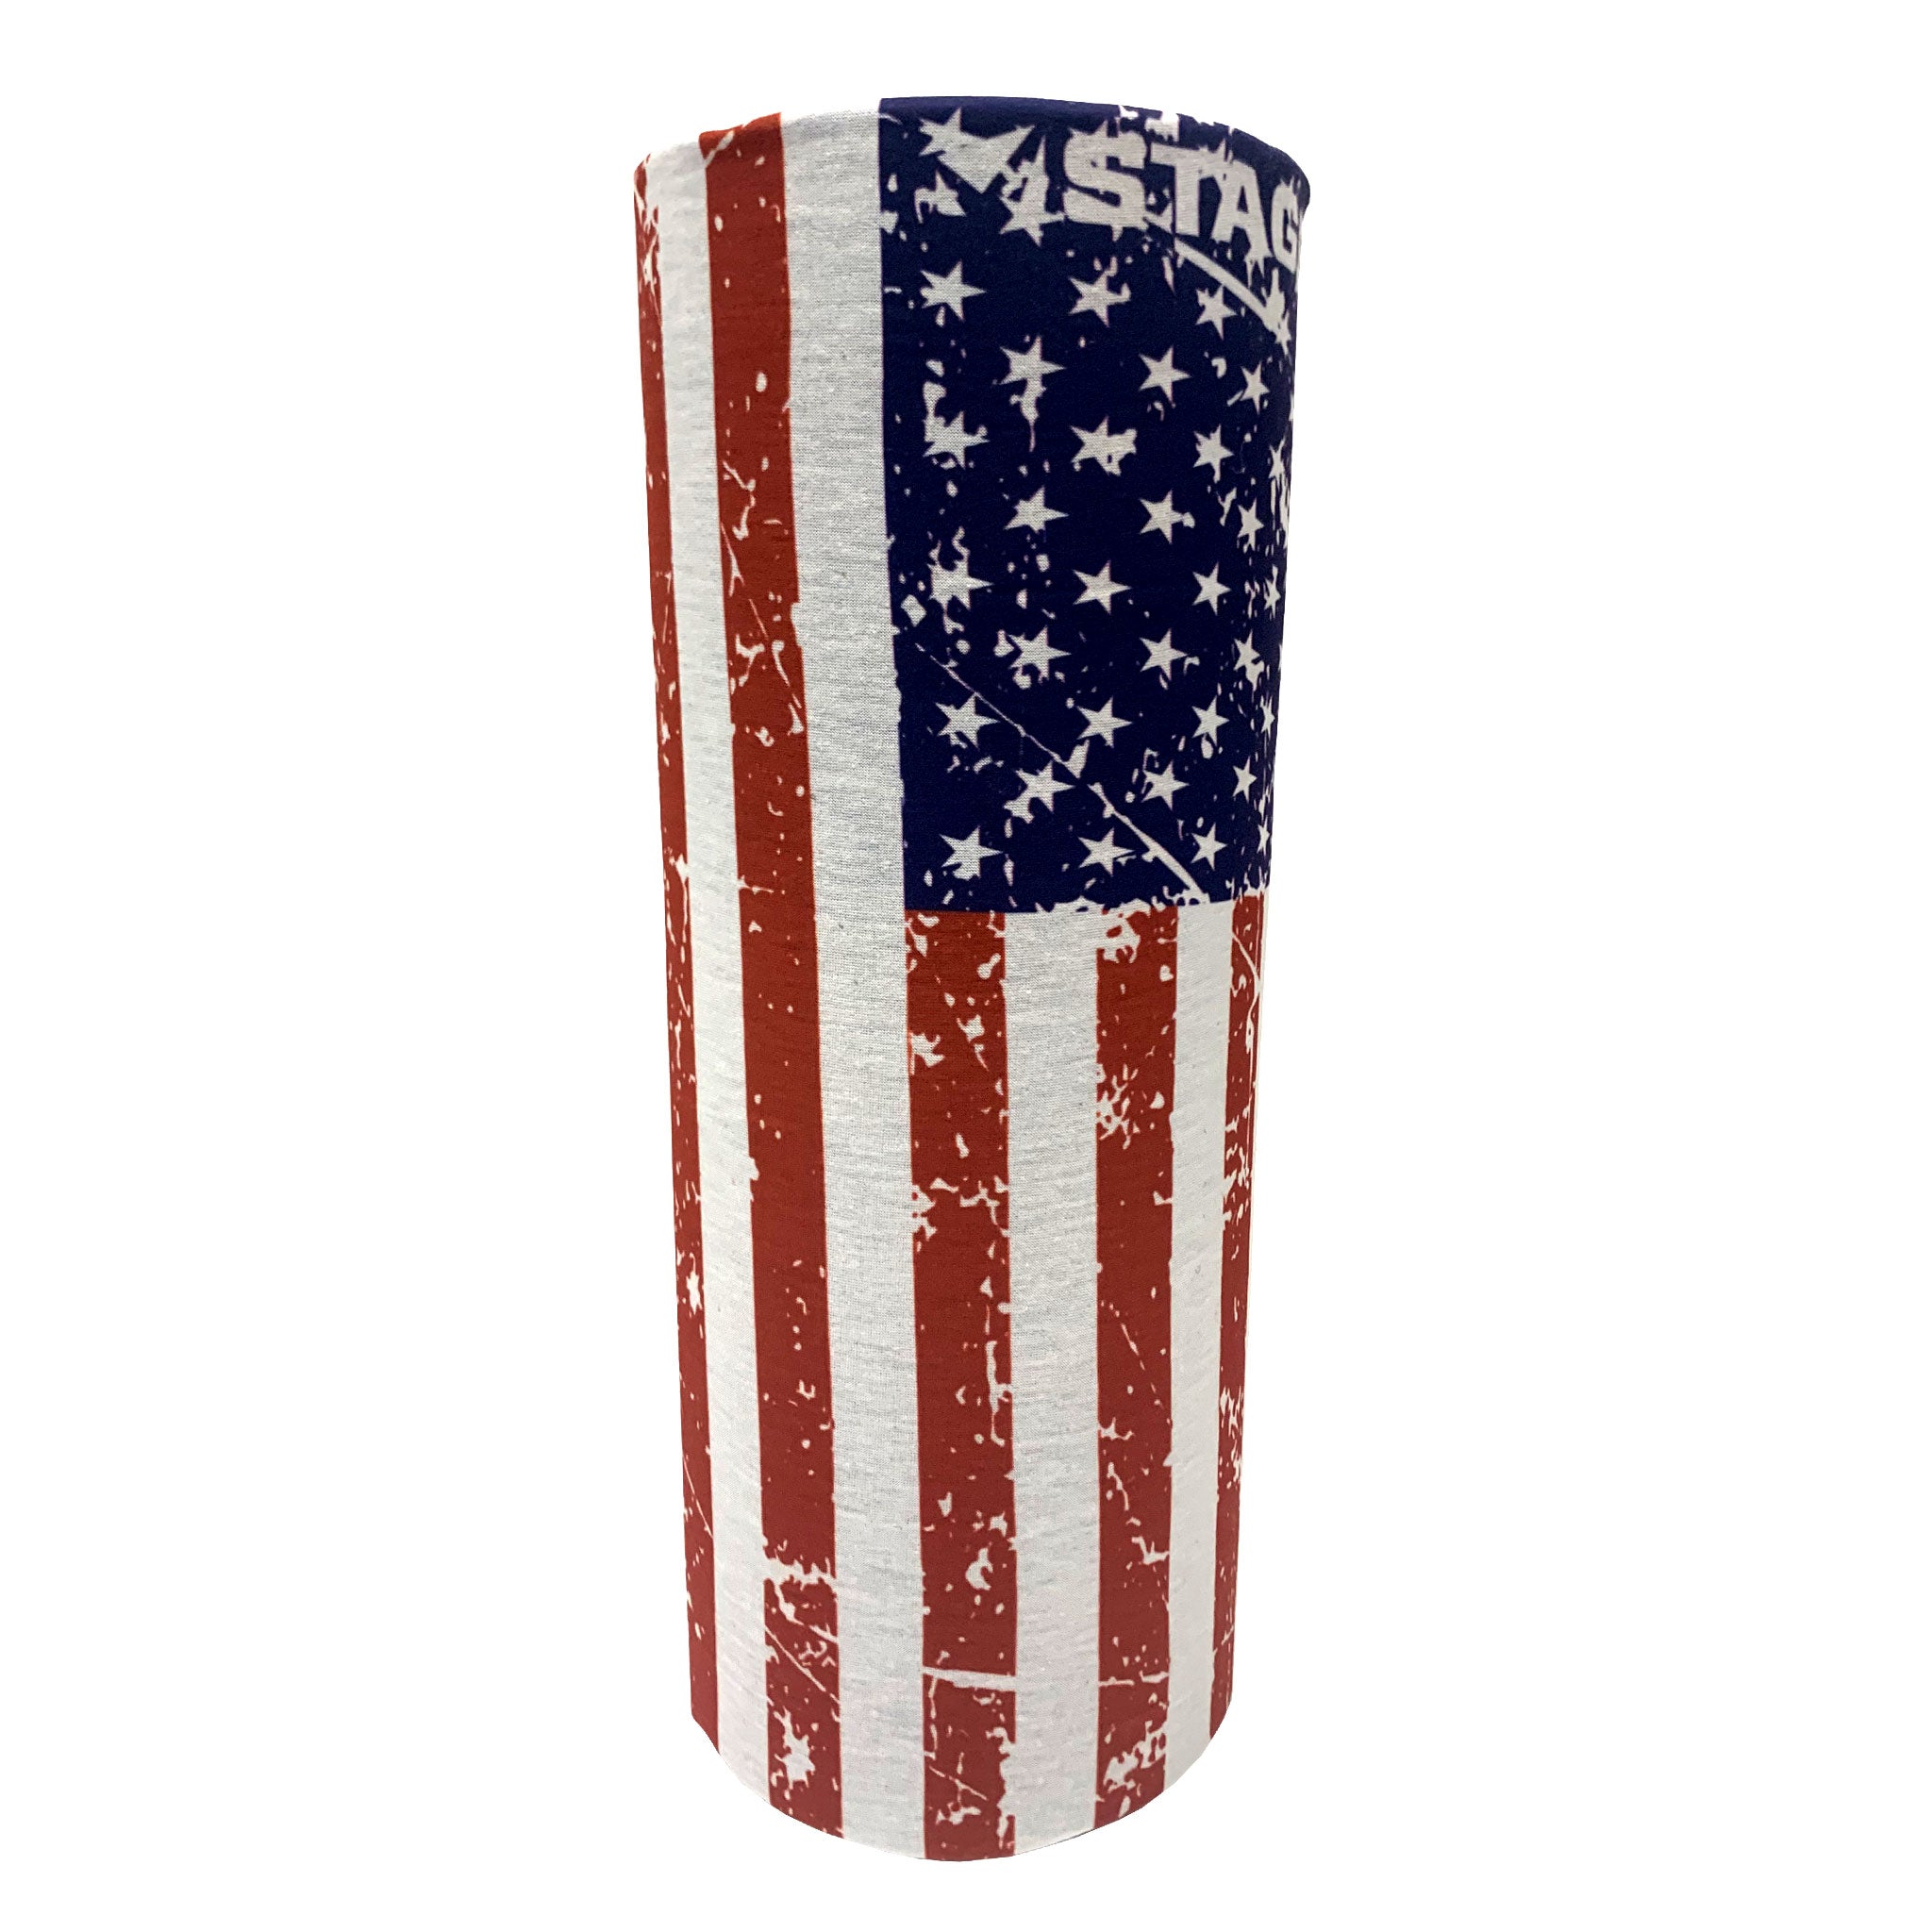 STAGE Face Tube - Patriot Red, White & Blue - Adult